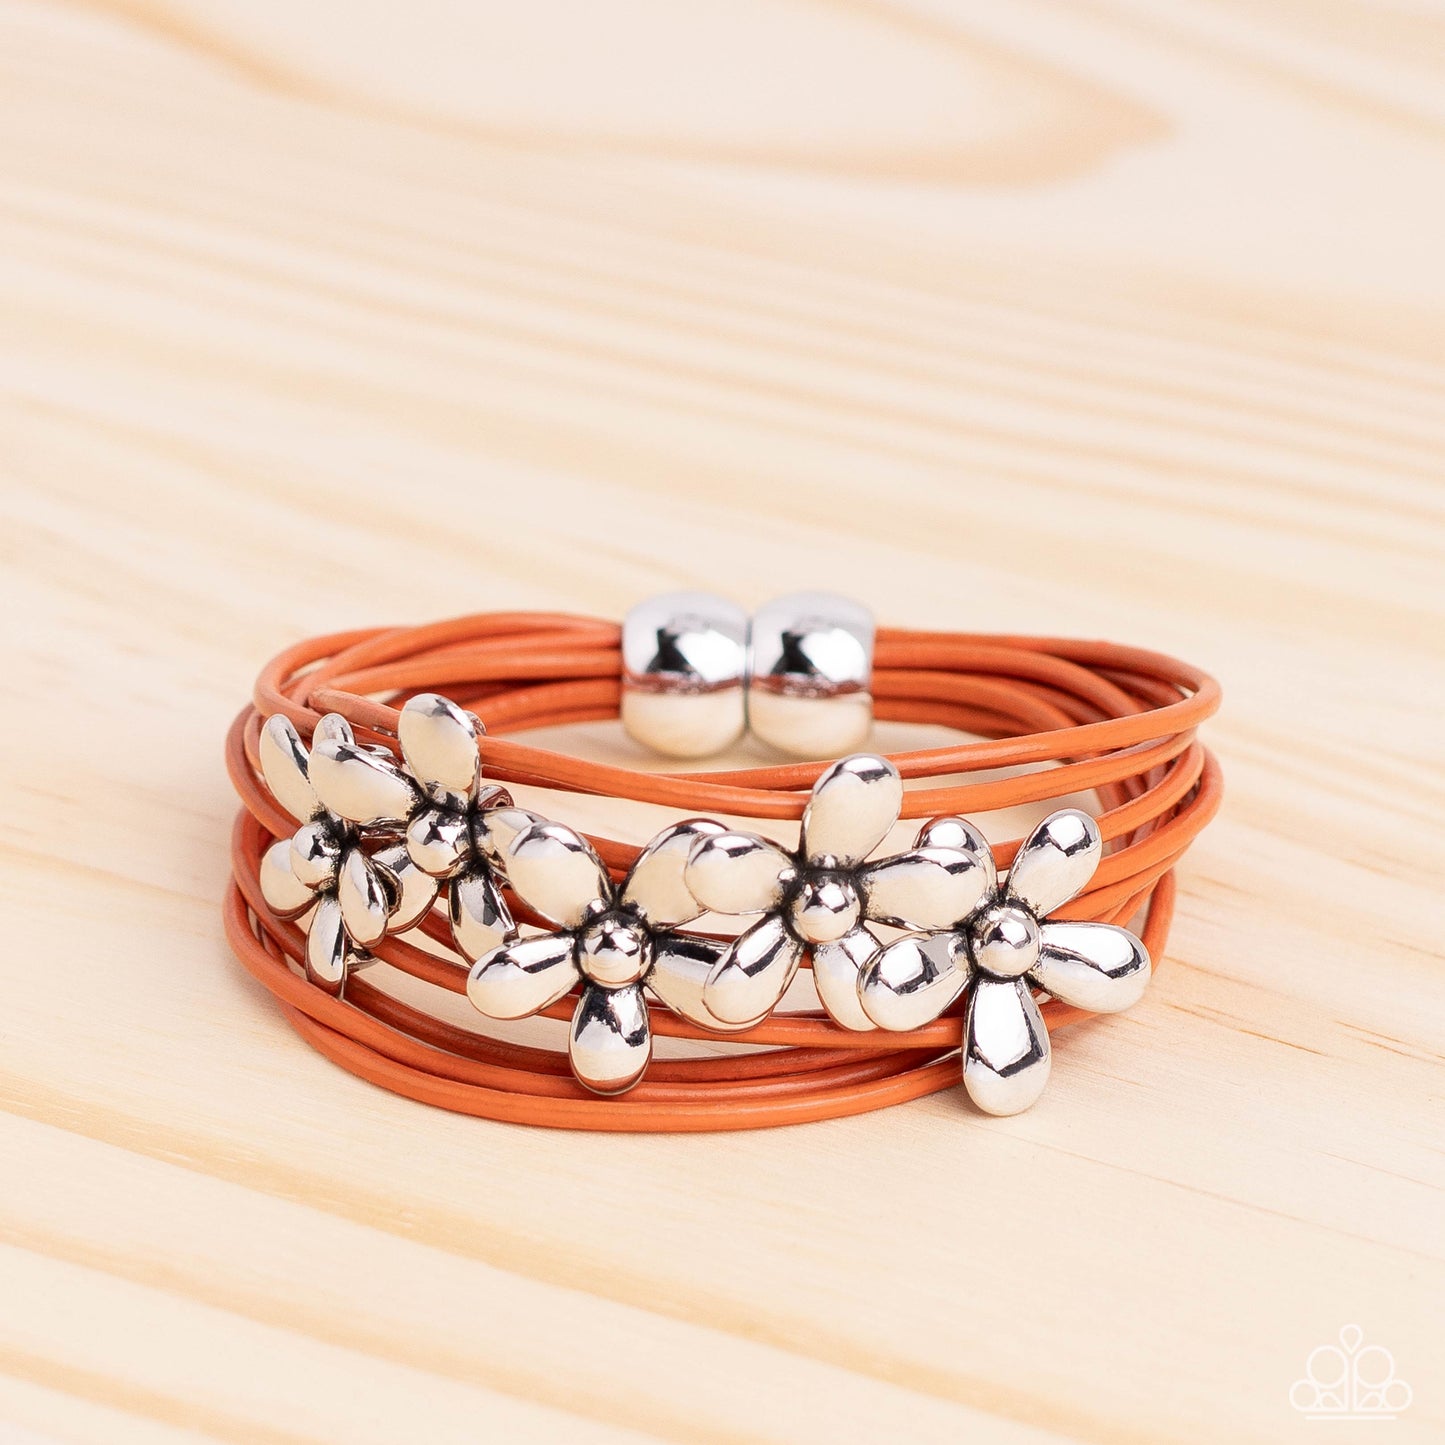 Here Comes the BLOOM - Orange Bracelet - Paparazzi Accessories - Shiny silver flowers glide along leathery burnt orange cords, clustering into a shimmery floral statement piece at the center of the wrist.